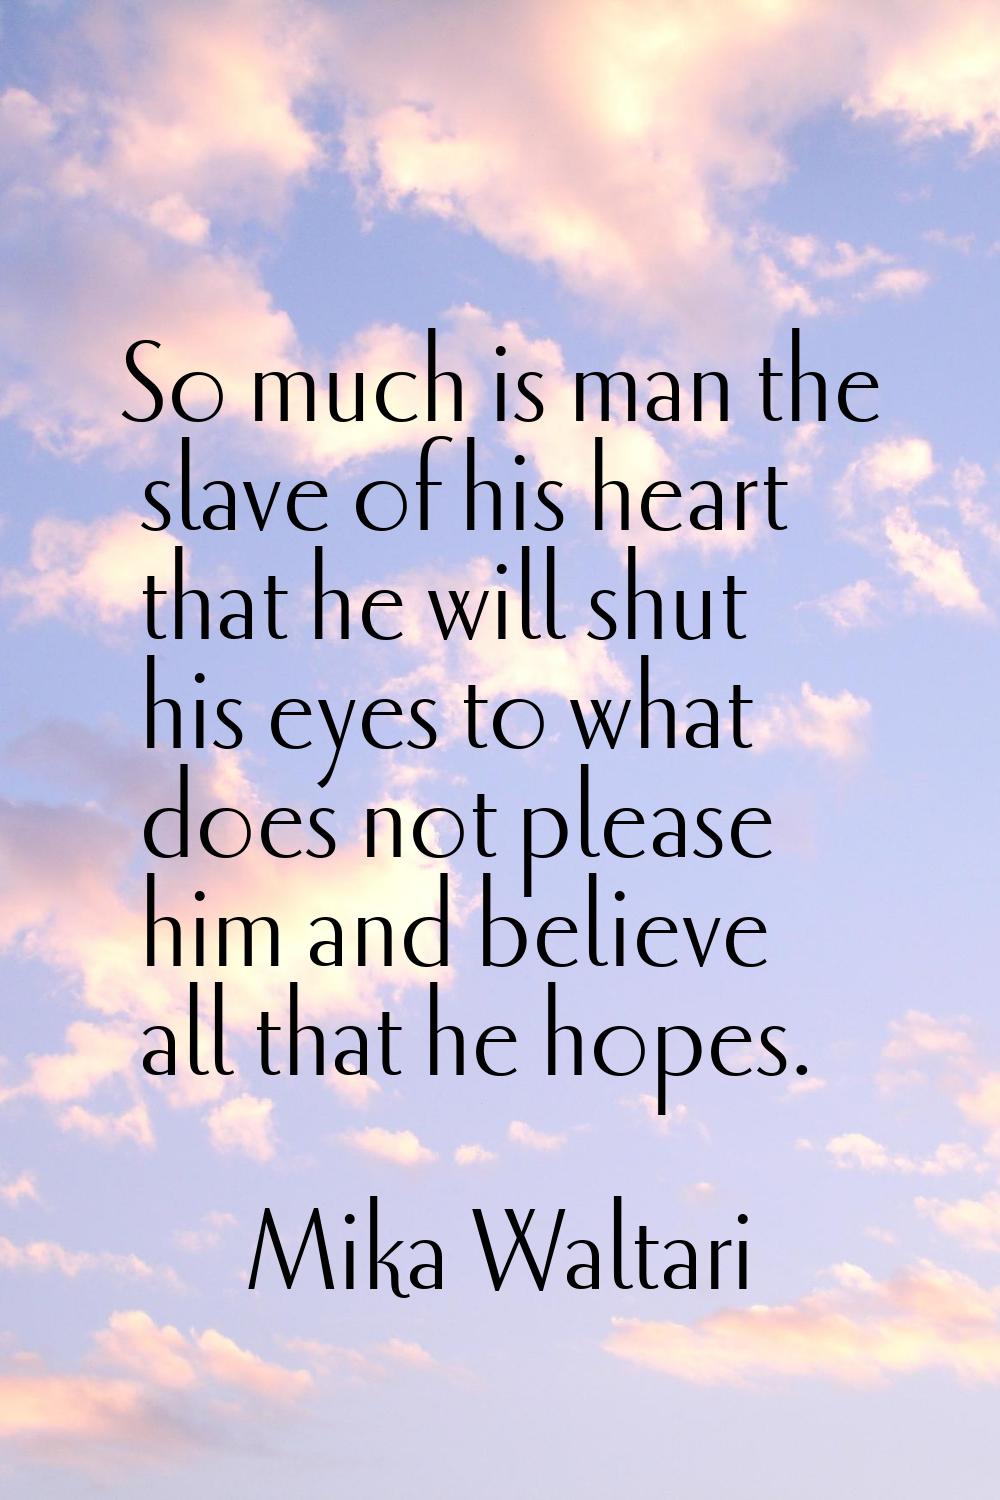 So much is man the slave of his heart that he will shut his eyes to what does not please him and be